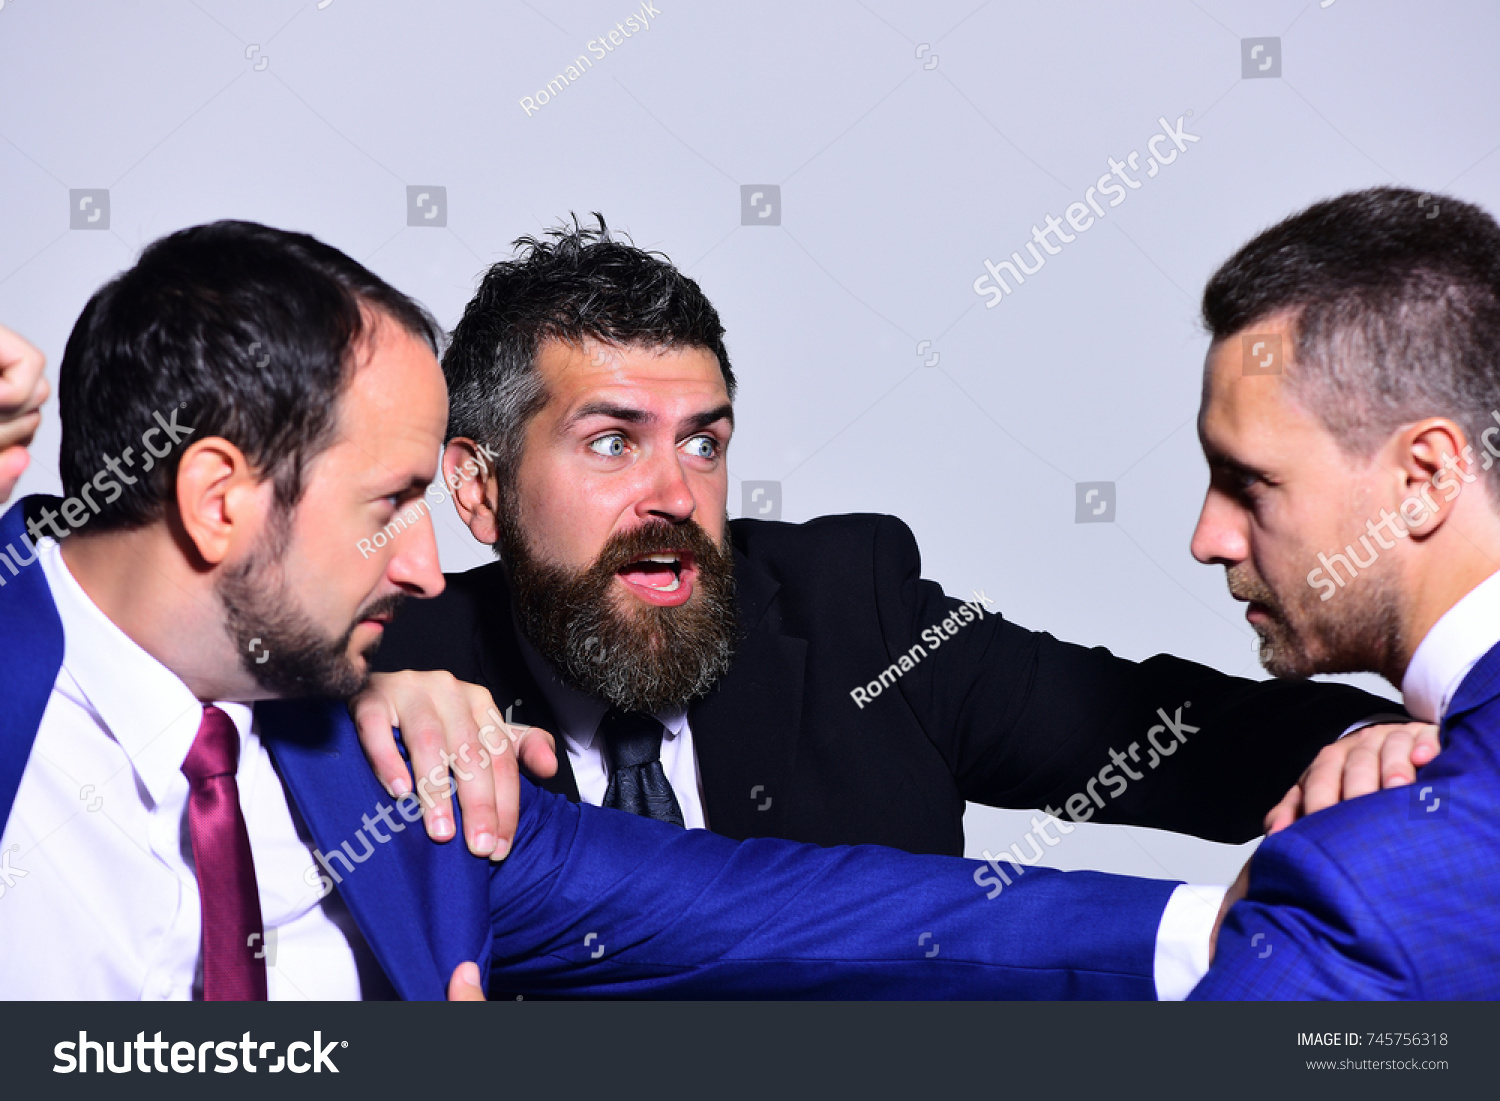 Businessmen with strict and scared faces in formal wear on grey background. Coworkers decide upon best working position. Business conflict and argument concept. Leaders fight for business leadership #745756318